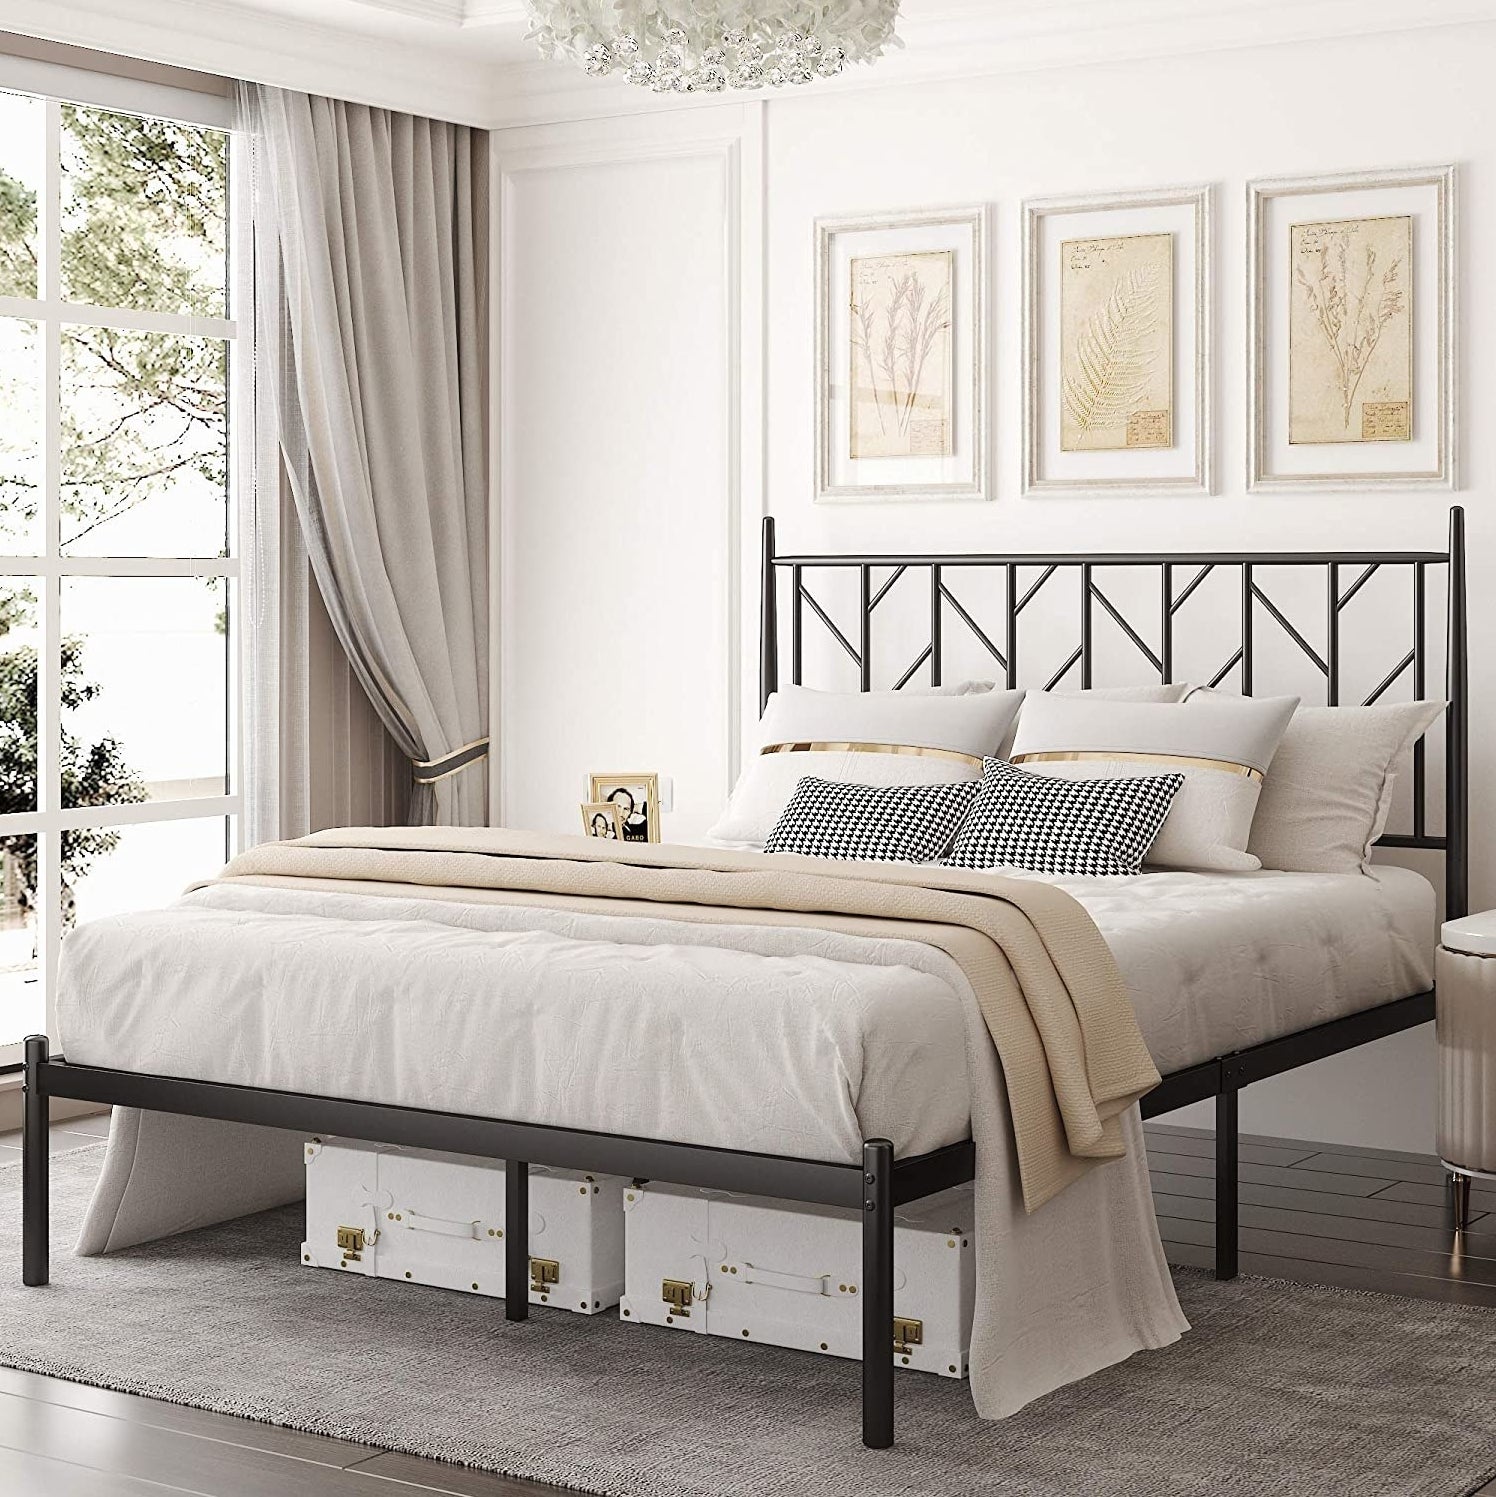 Image of black bed frame with linens